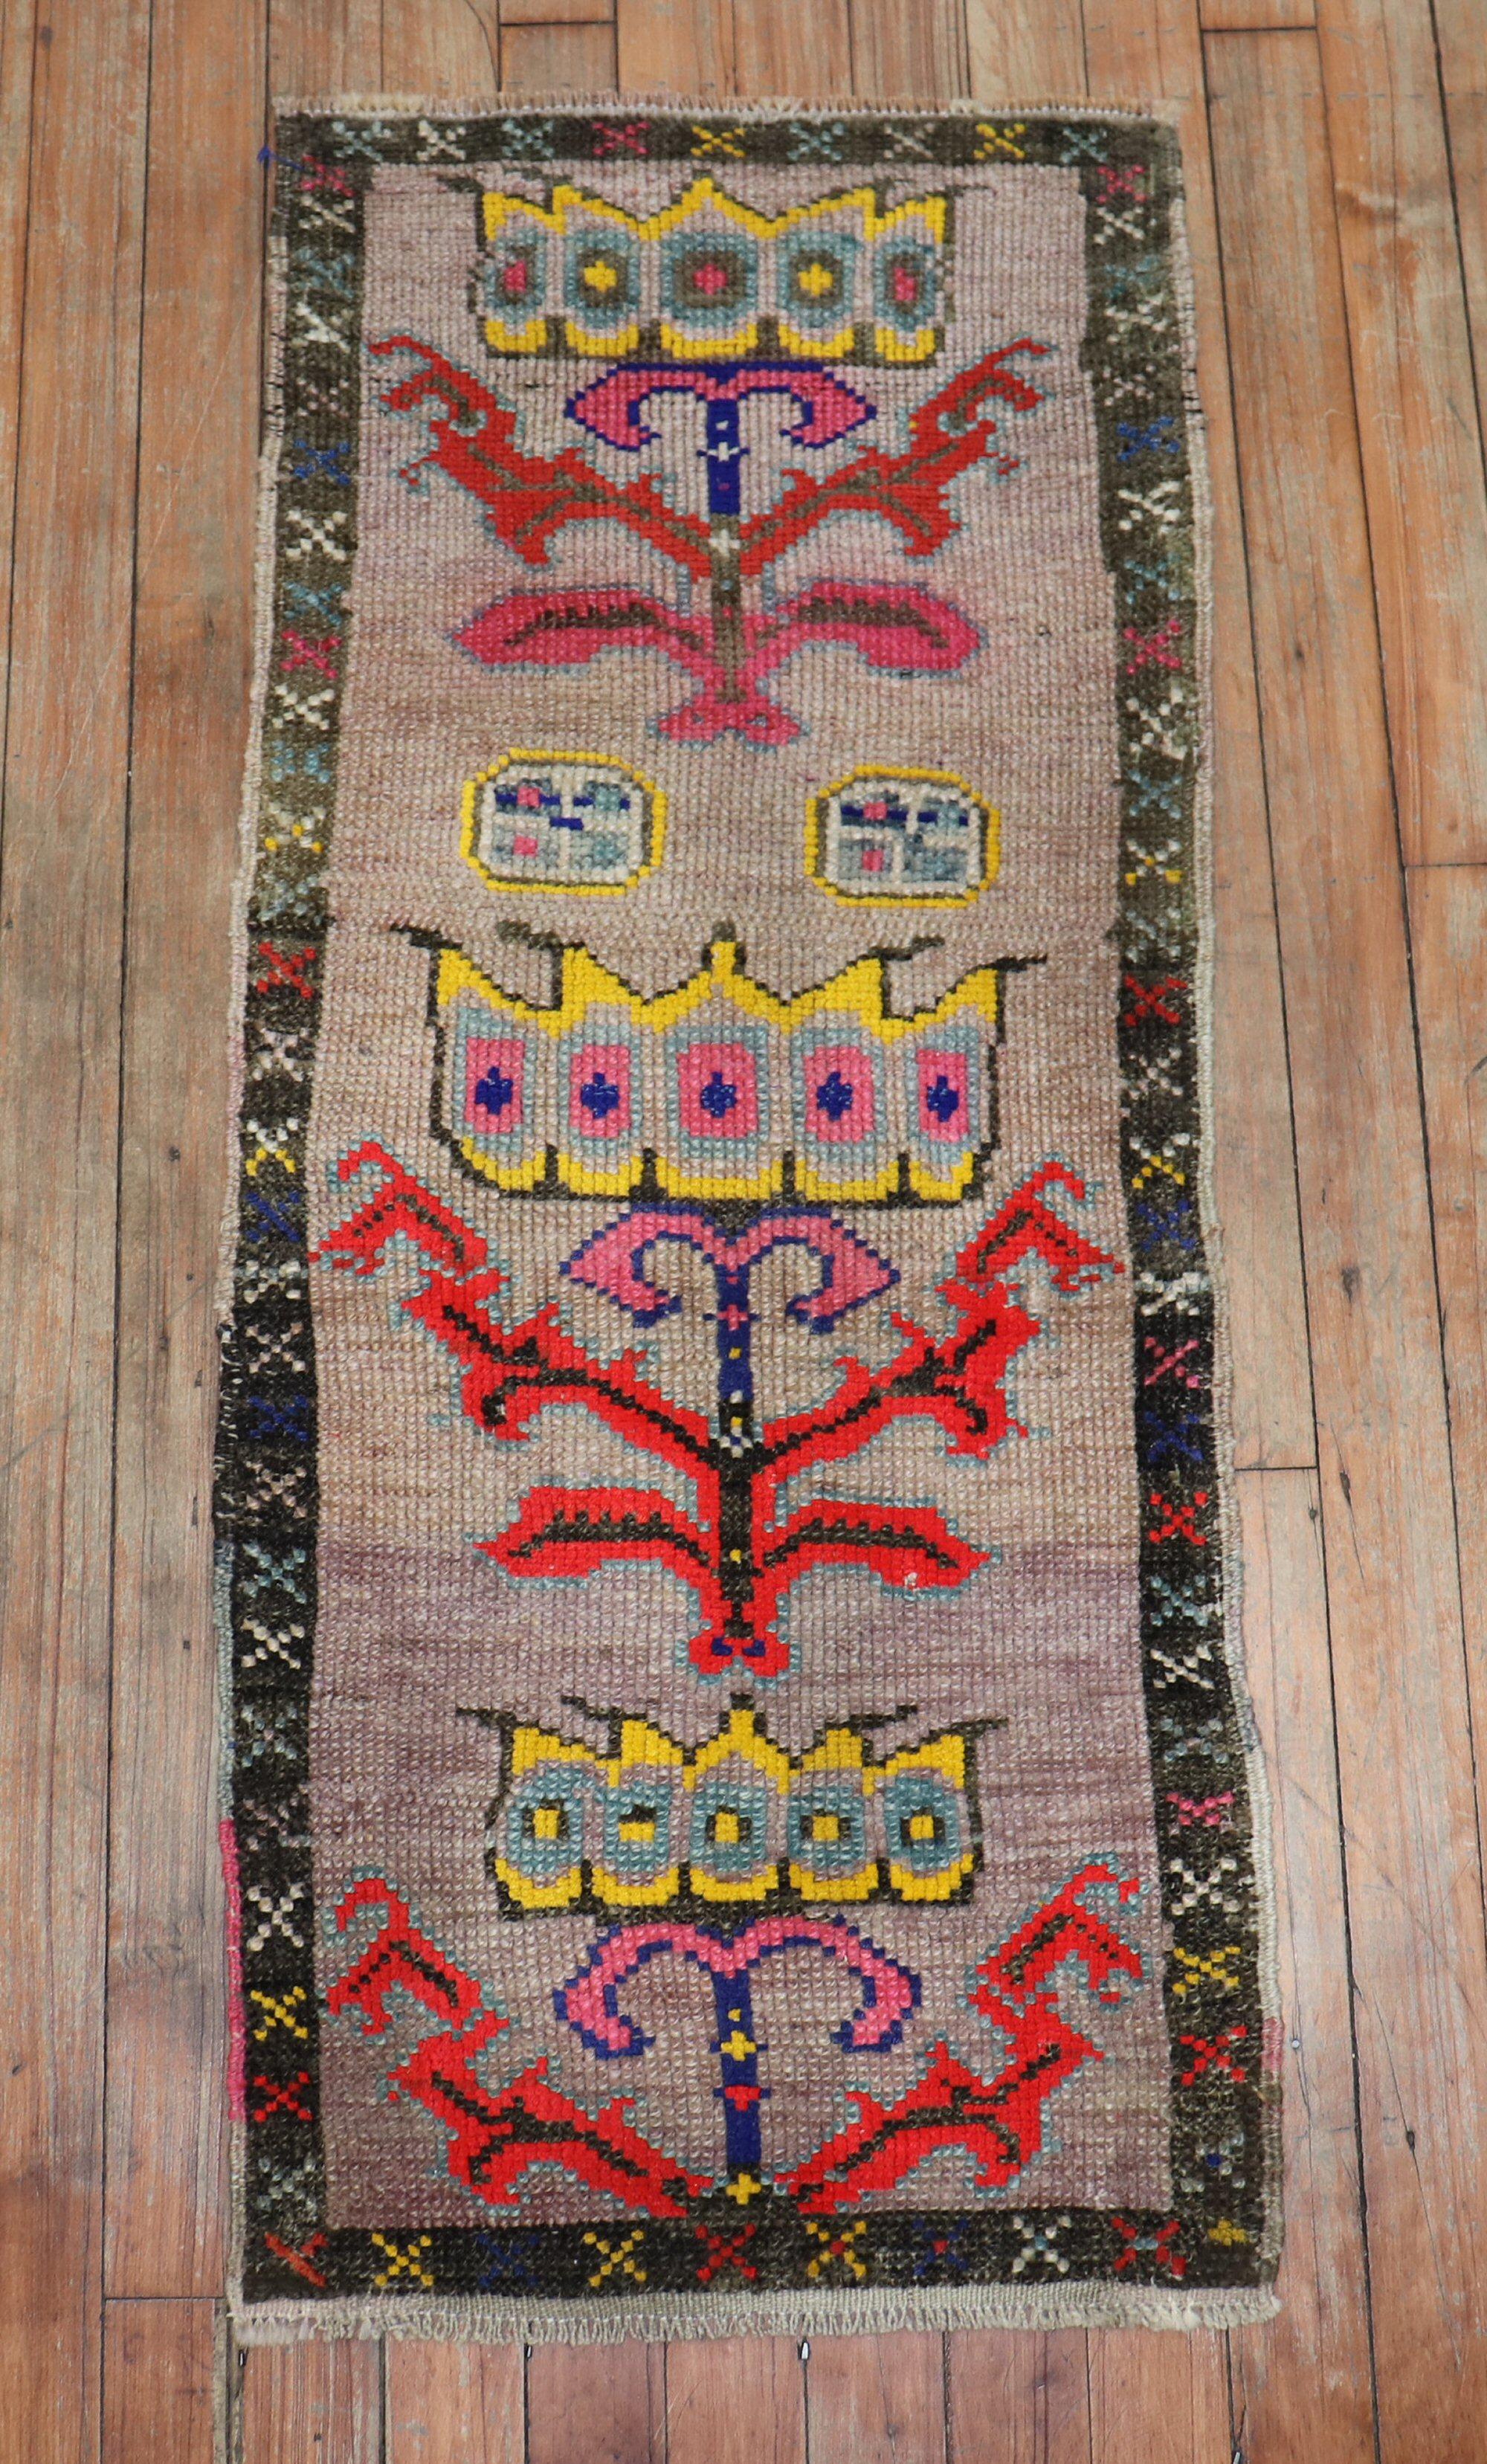 Quirky vintage Turkish Anatolian floral rug featuring vibrant colors on a brown field

Measures: 1'5' x 3'5